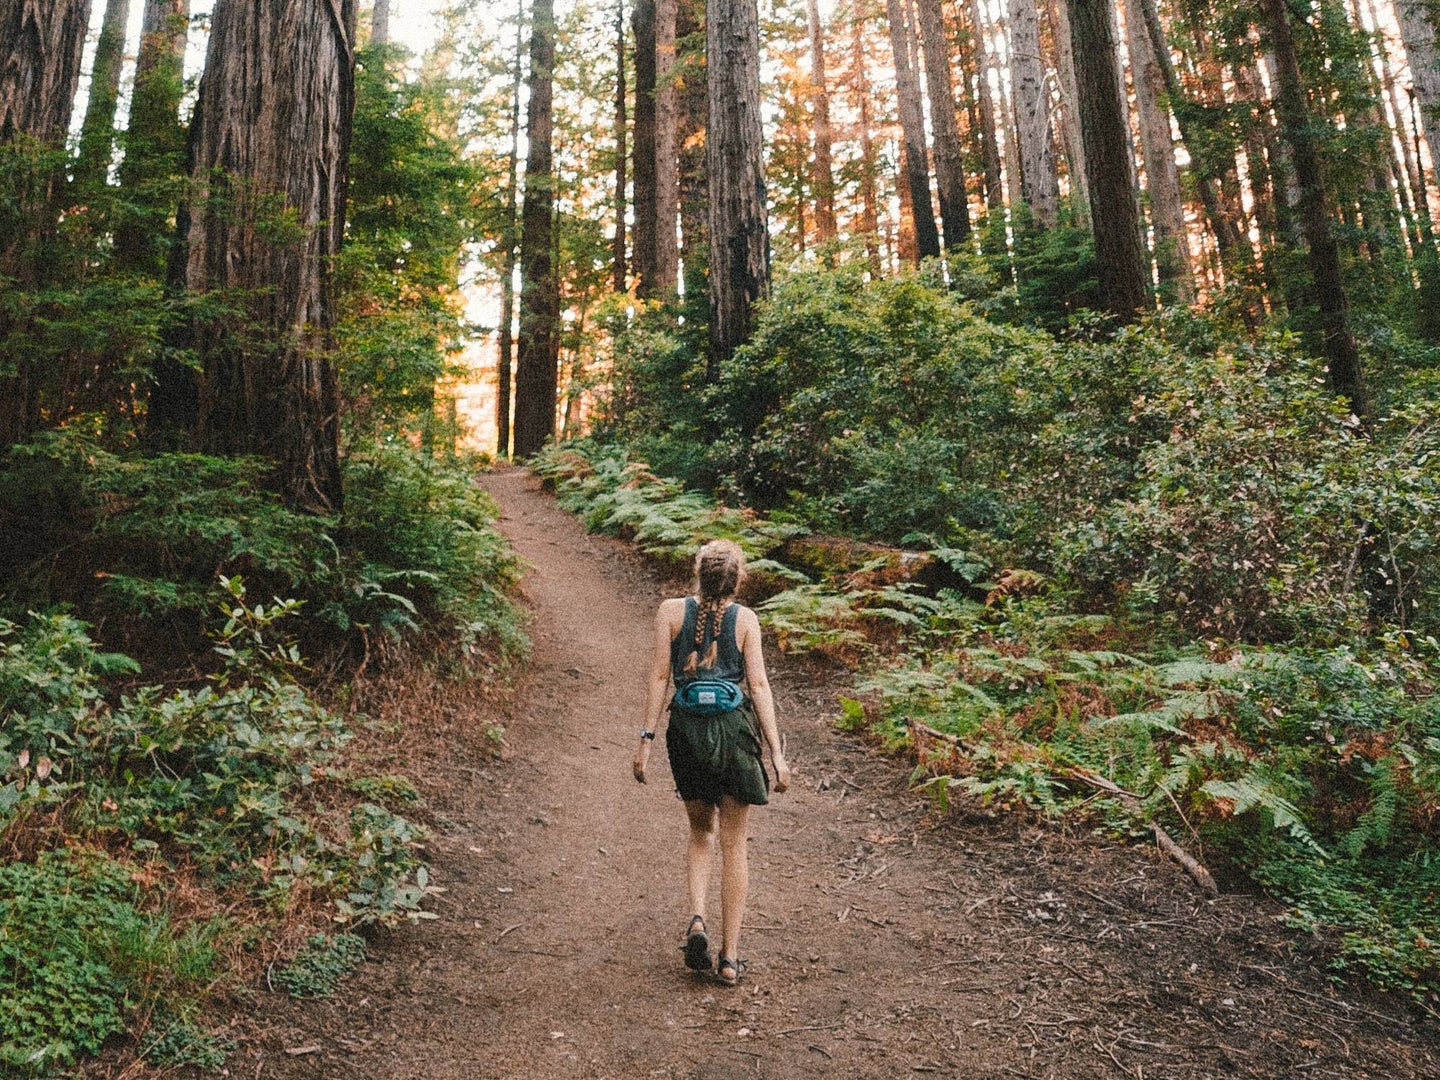 hiker in the middle of forest